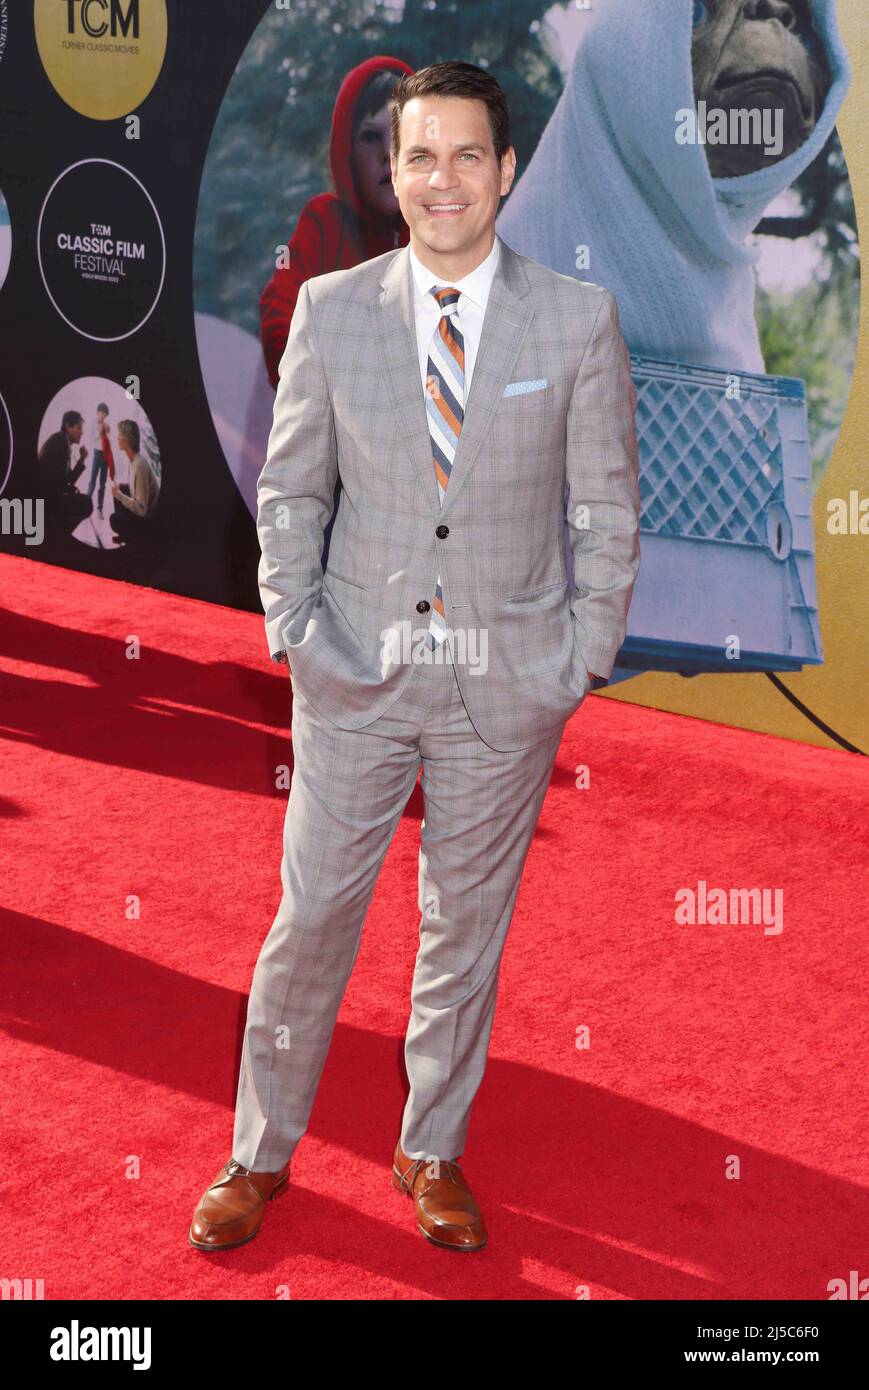 Los Angeles, USA. 21st Apr, 2022. Dave Karger 2022/04/21 The 40th Anniversary Screening of “E.T. the Extra-Terrestrial” held at TCL Chinese Theatre in Hollywood, CA, Credit: Cronos/Alamy Live News Stock Photo